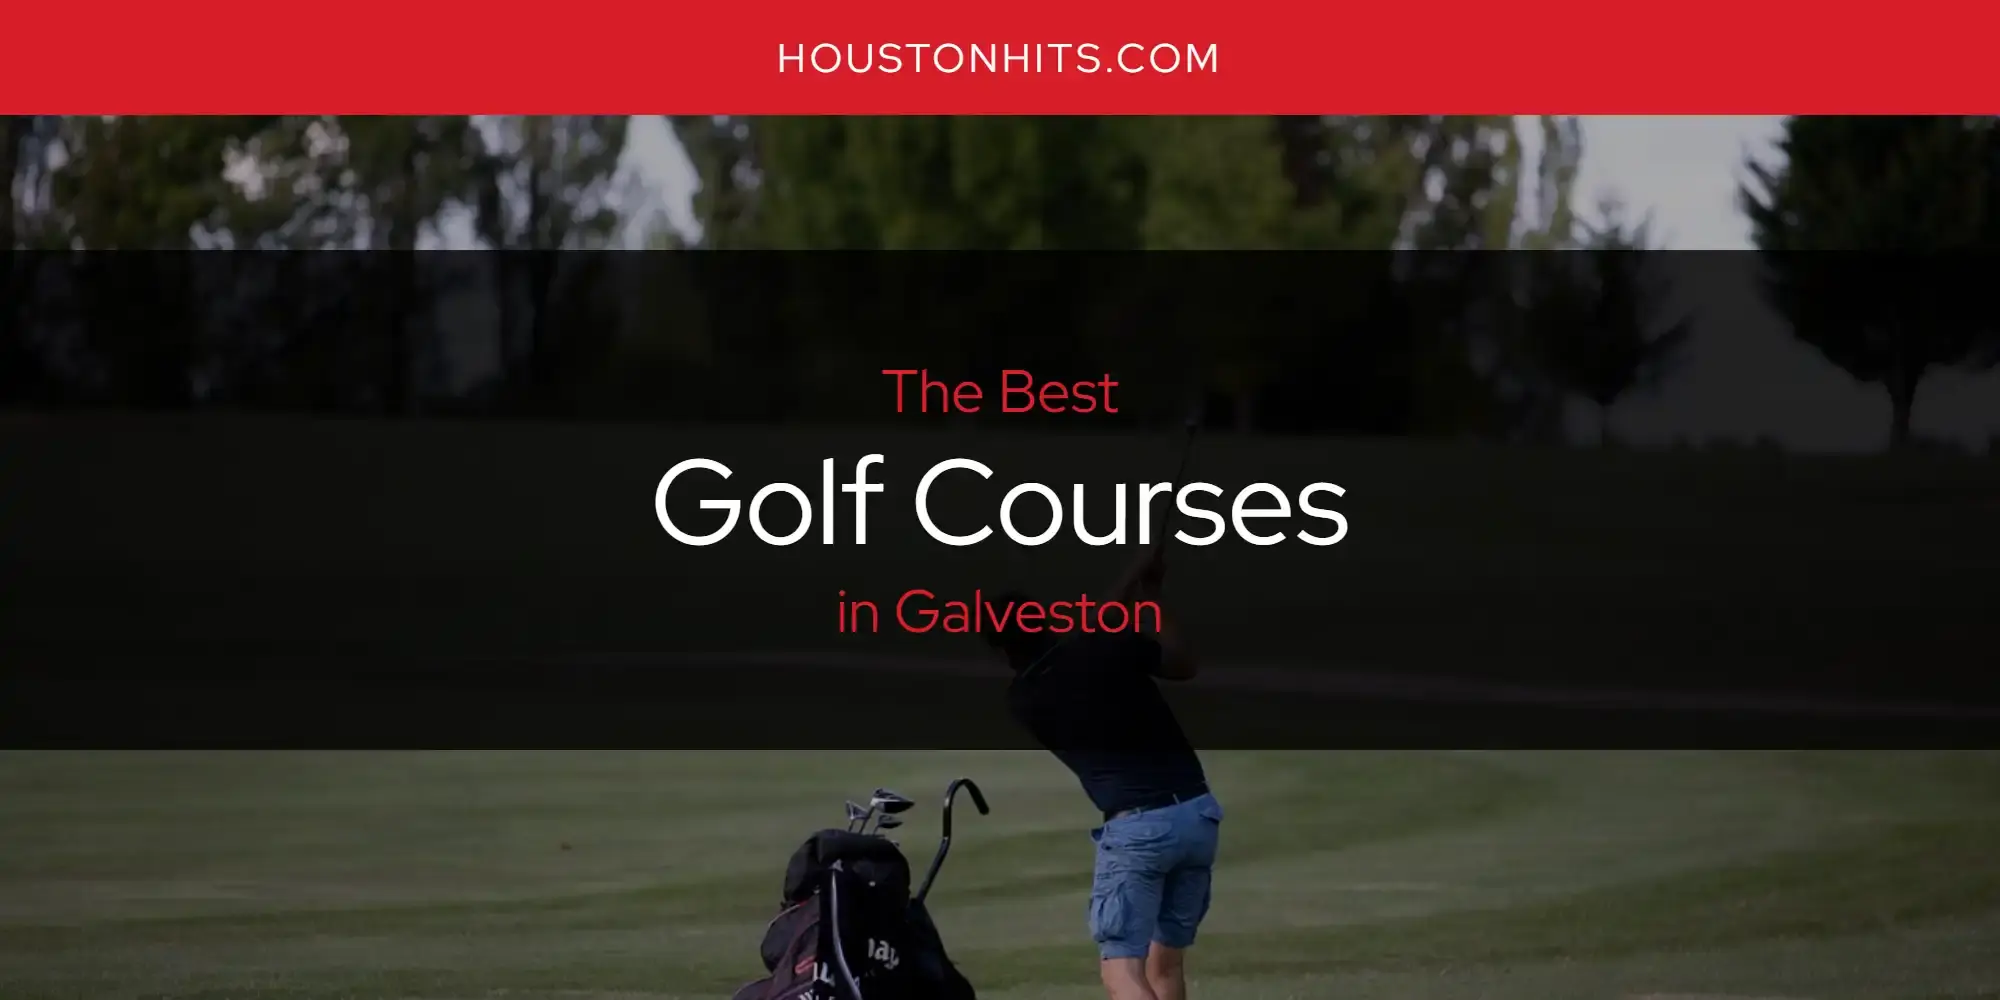 Best Golf Courses in Galveston? Here's the Top 17